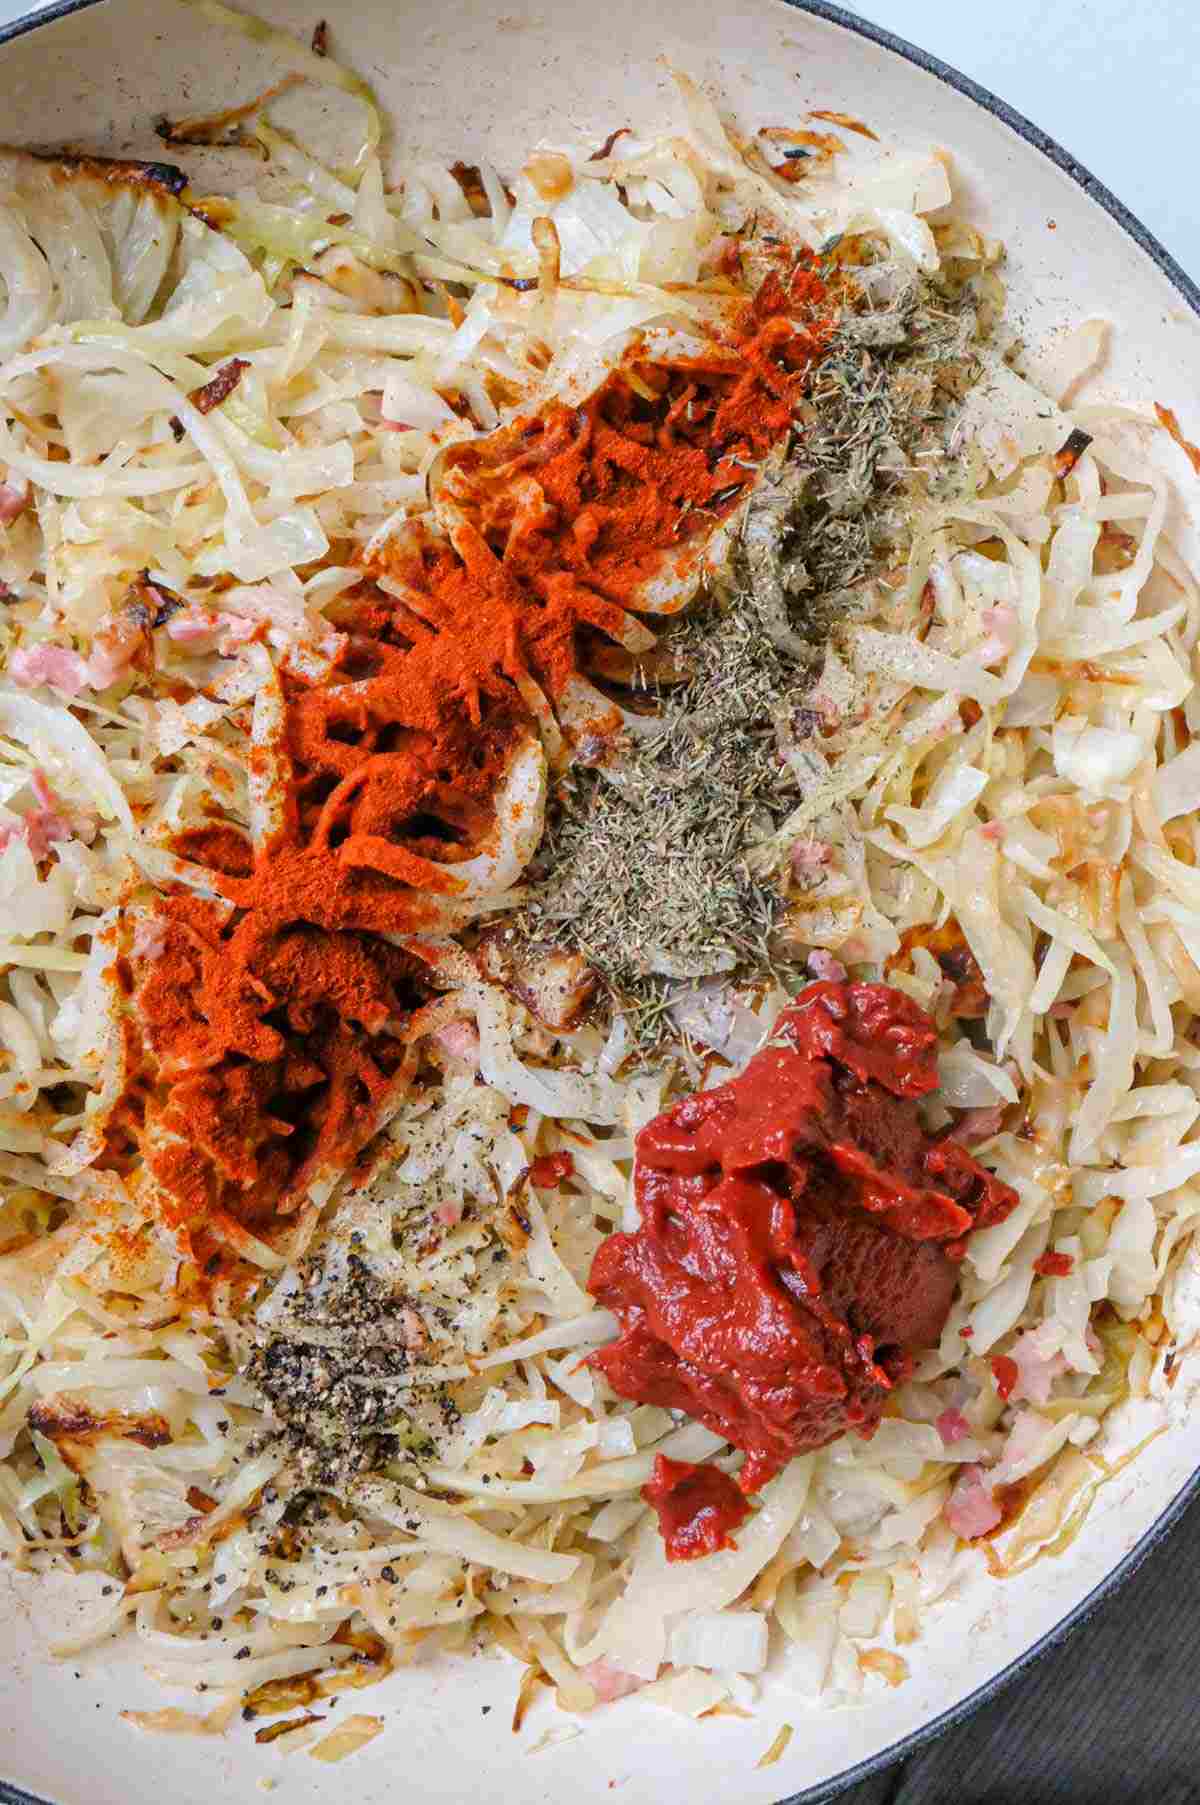 cabbage with seasoning and tomato paste